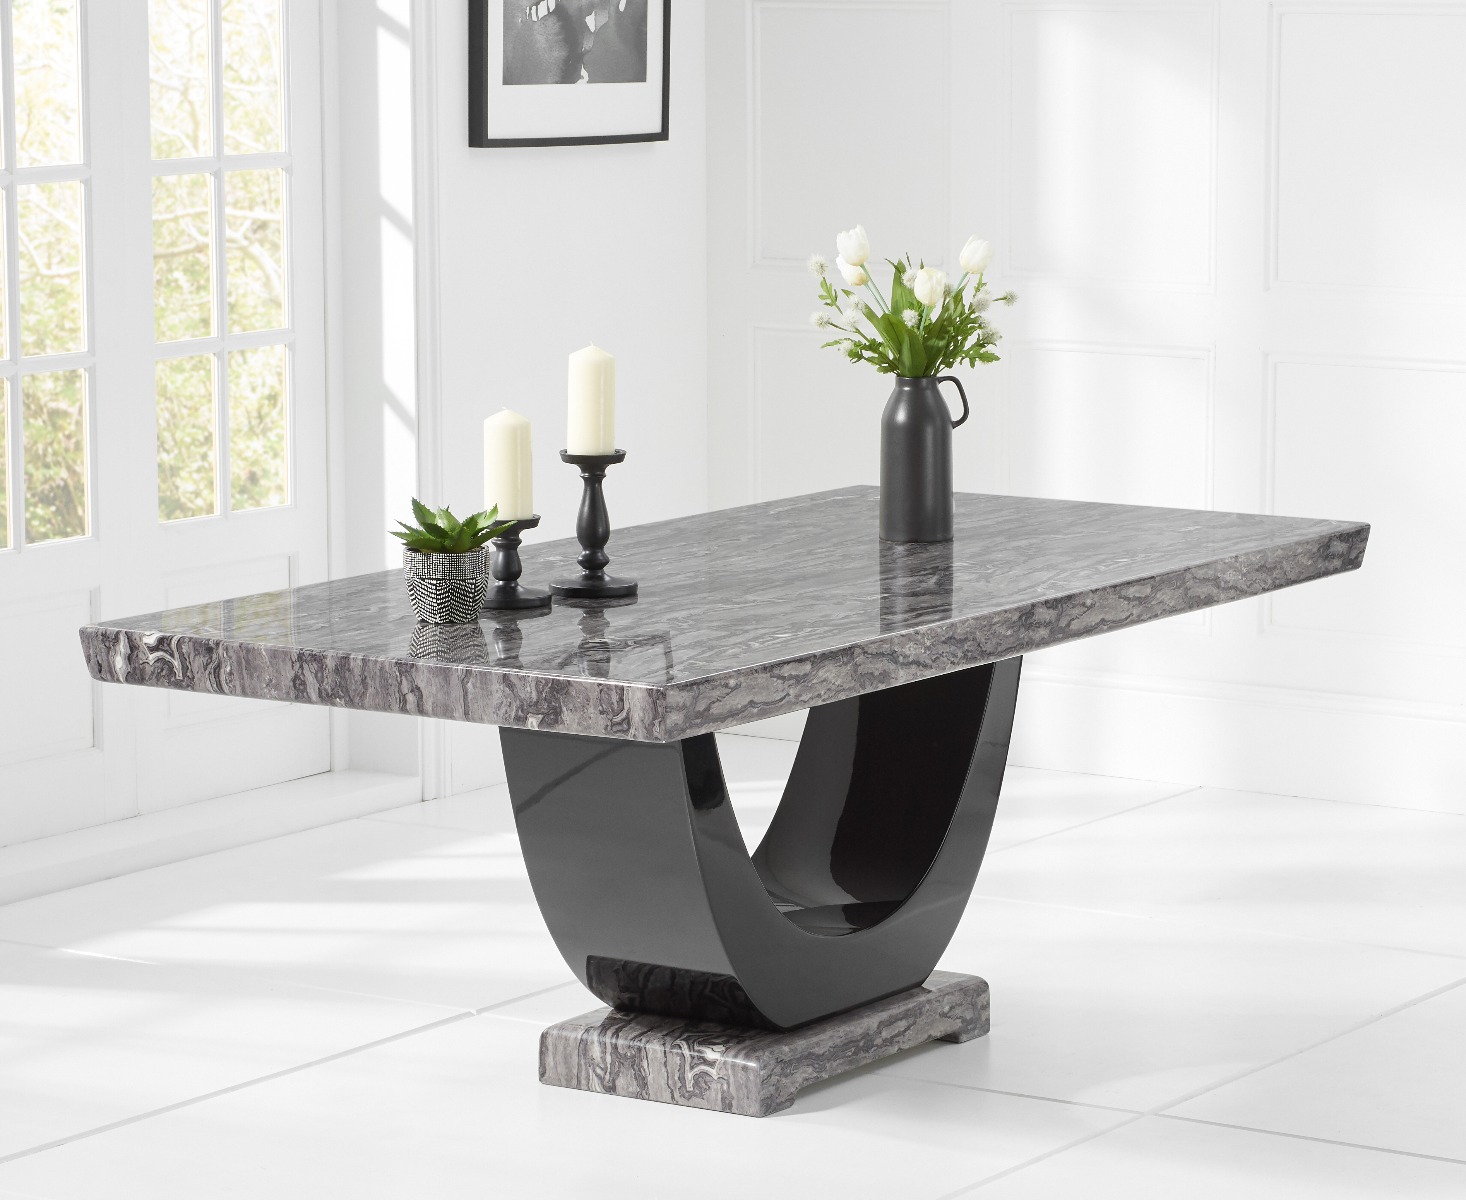 Photo 4 of Raphael 200cm dark grey pedestal marble dining table with 12 grey francesca chairs